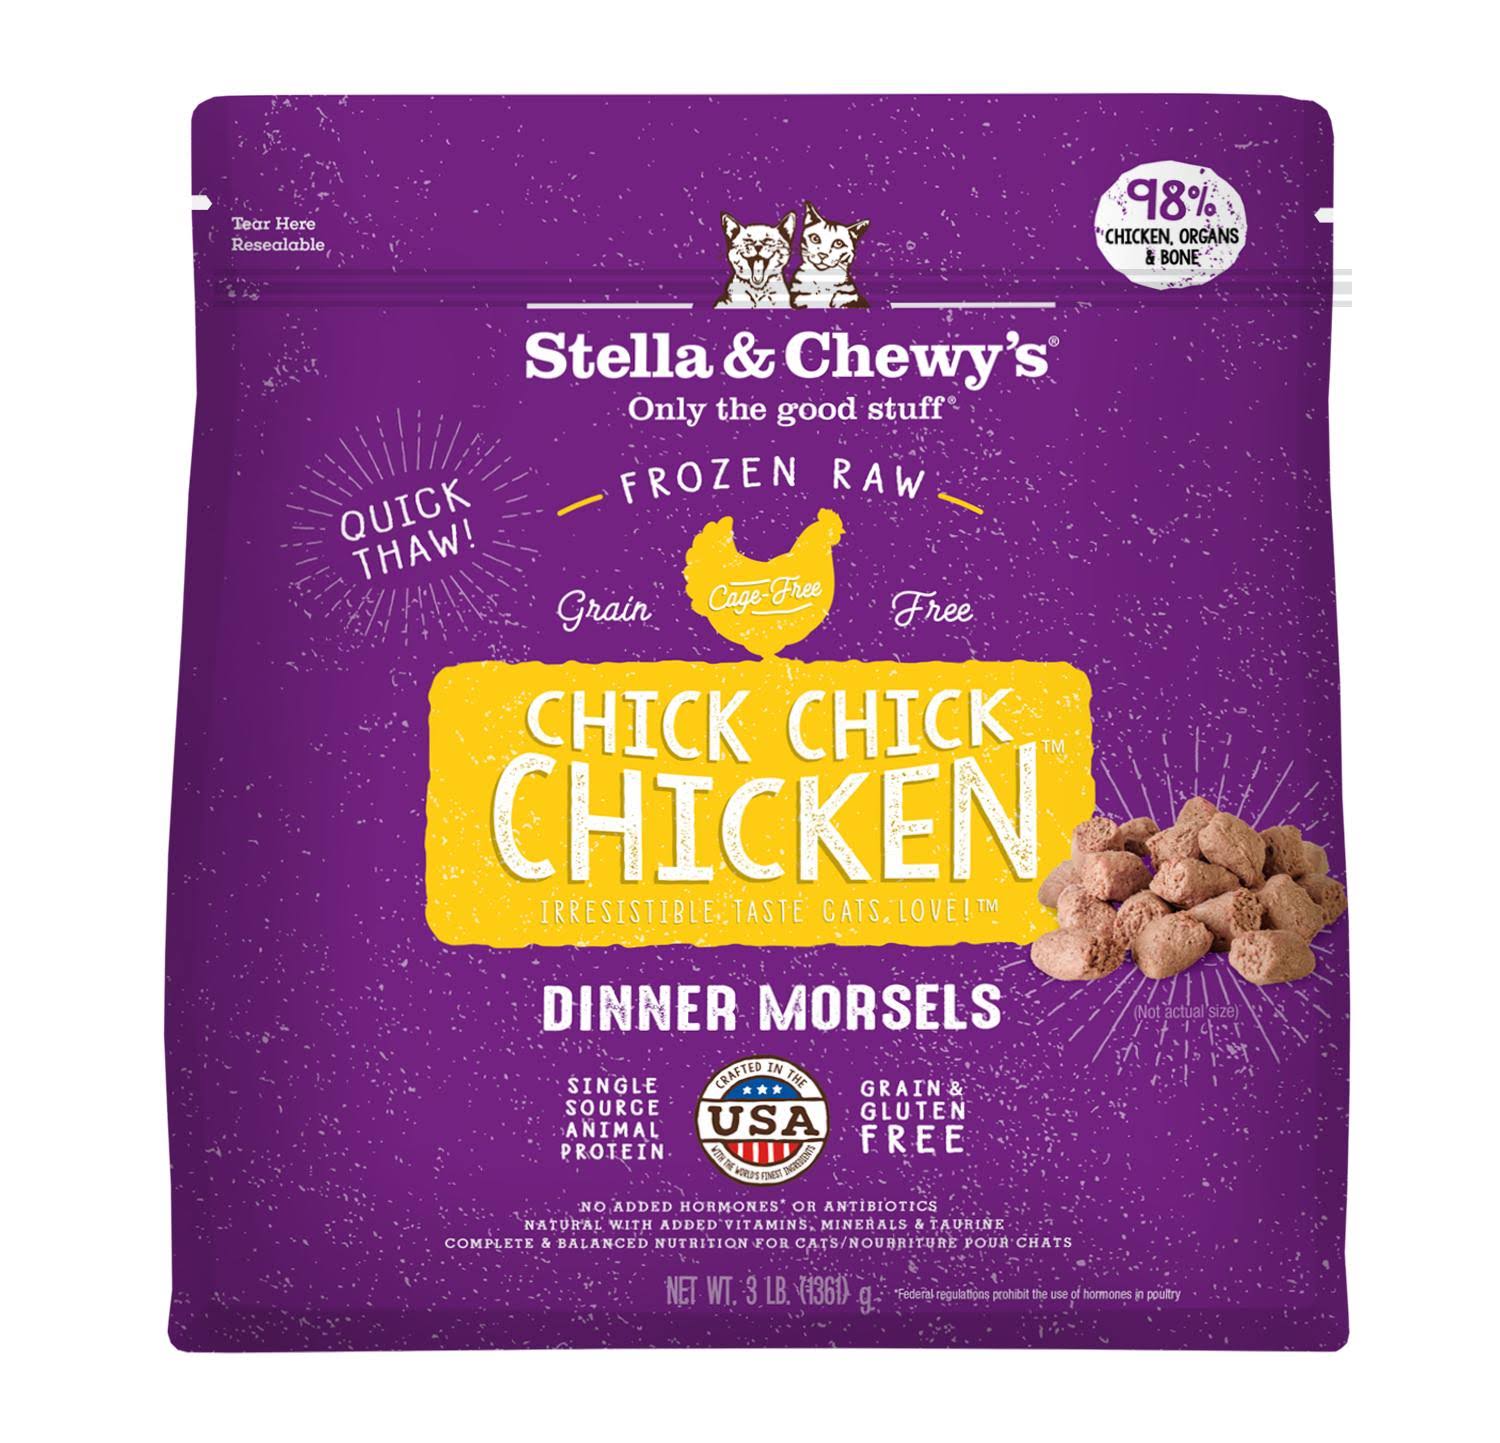 Chick, Chick Chicken Dinner Morsels - Frozen Raw Cat Food - Stella & Chewy's